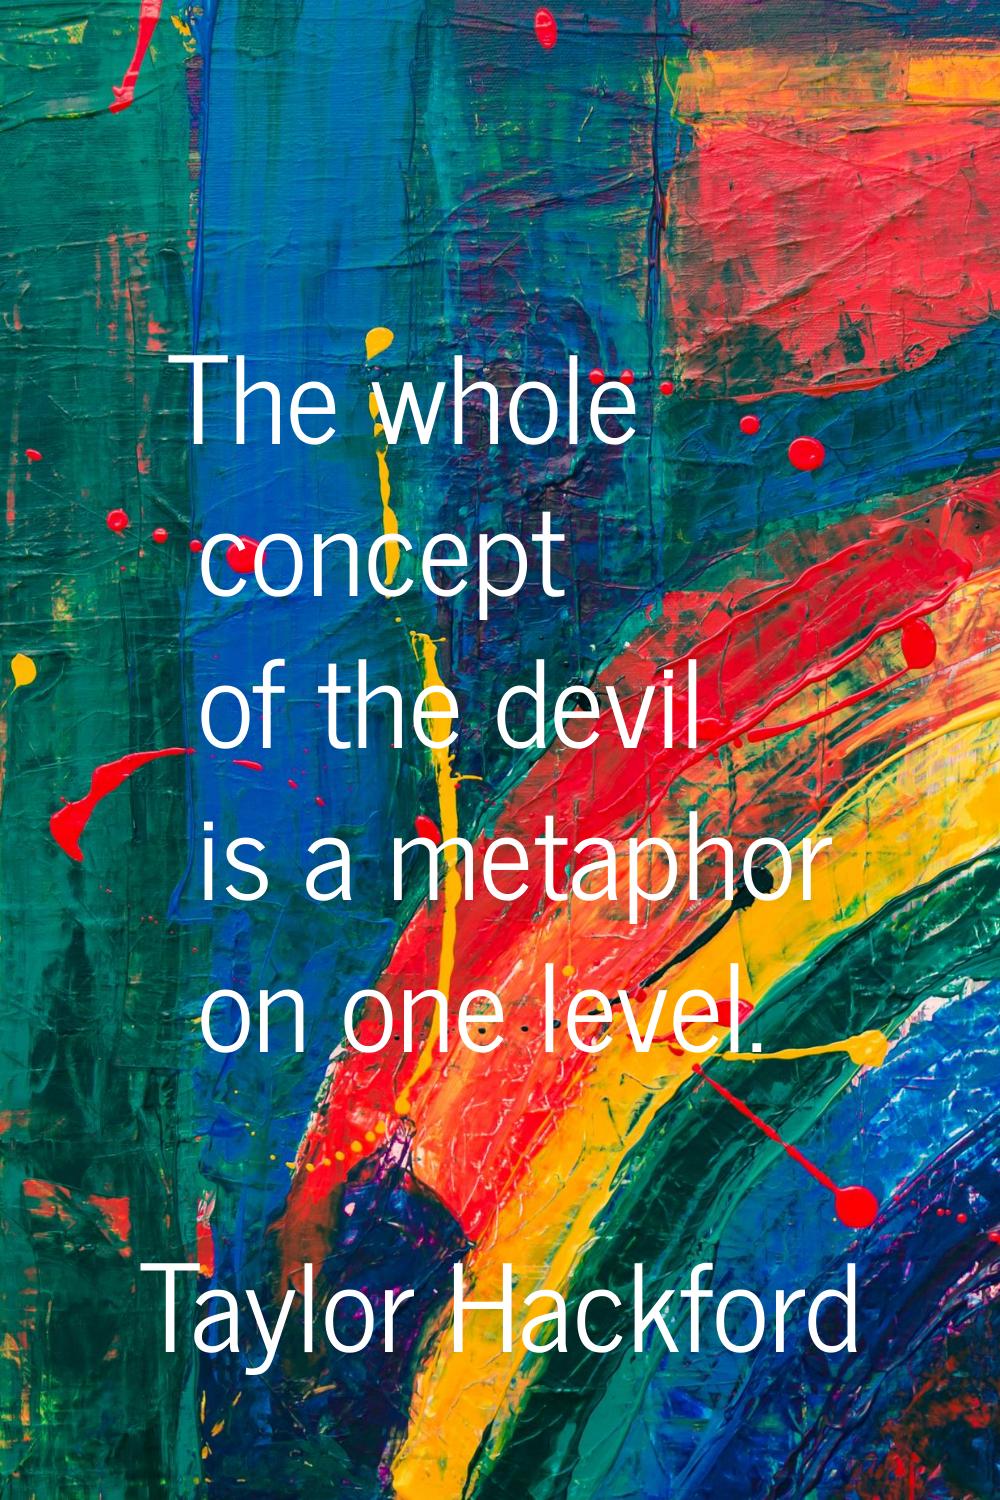 The whole concept of the devil is a metaphor on one level.